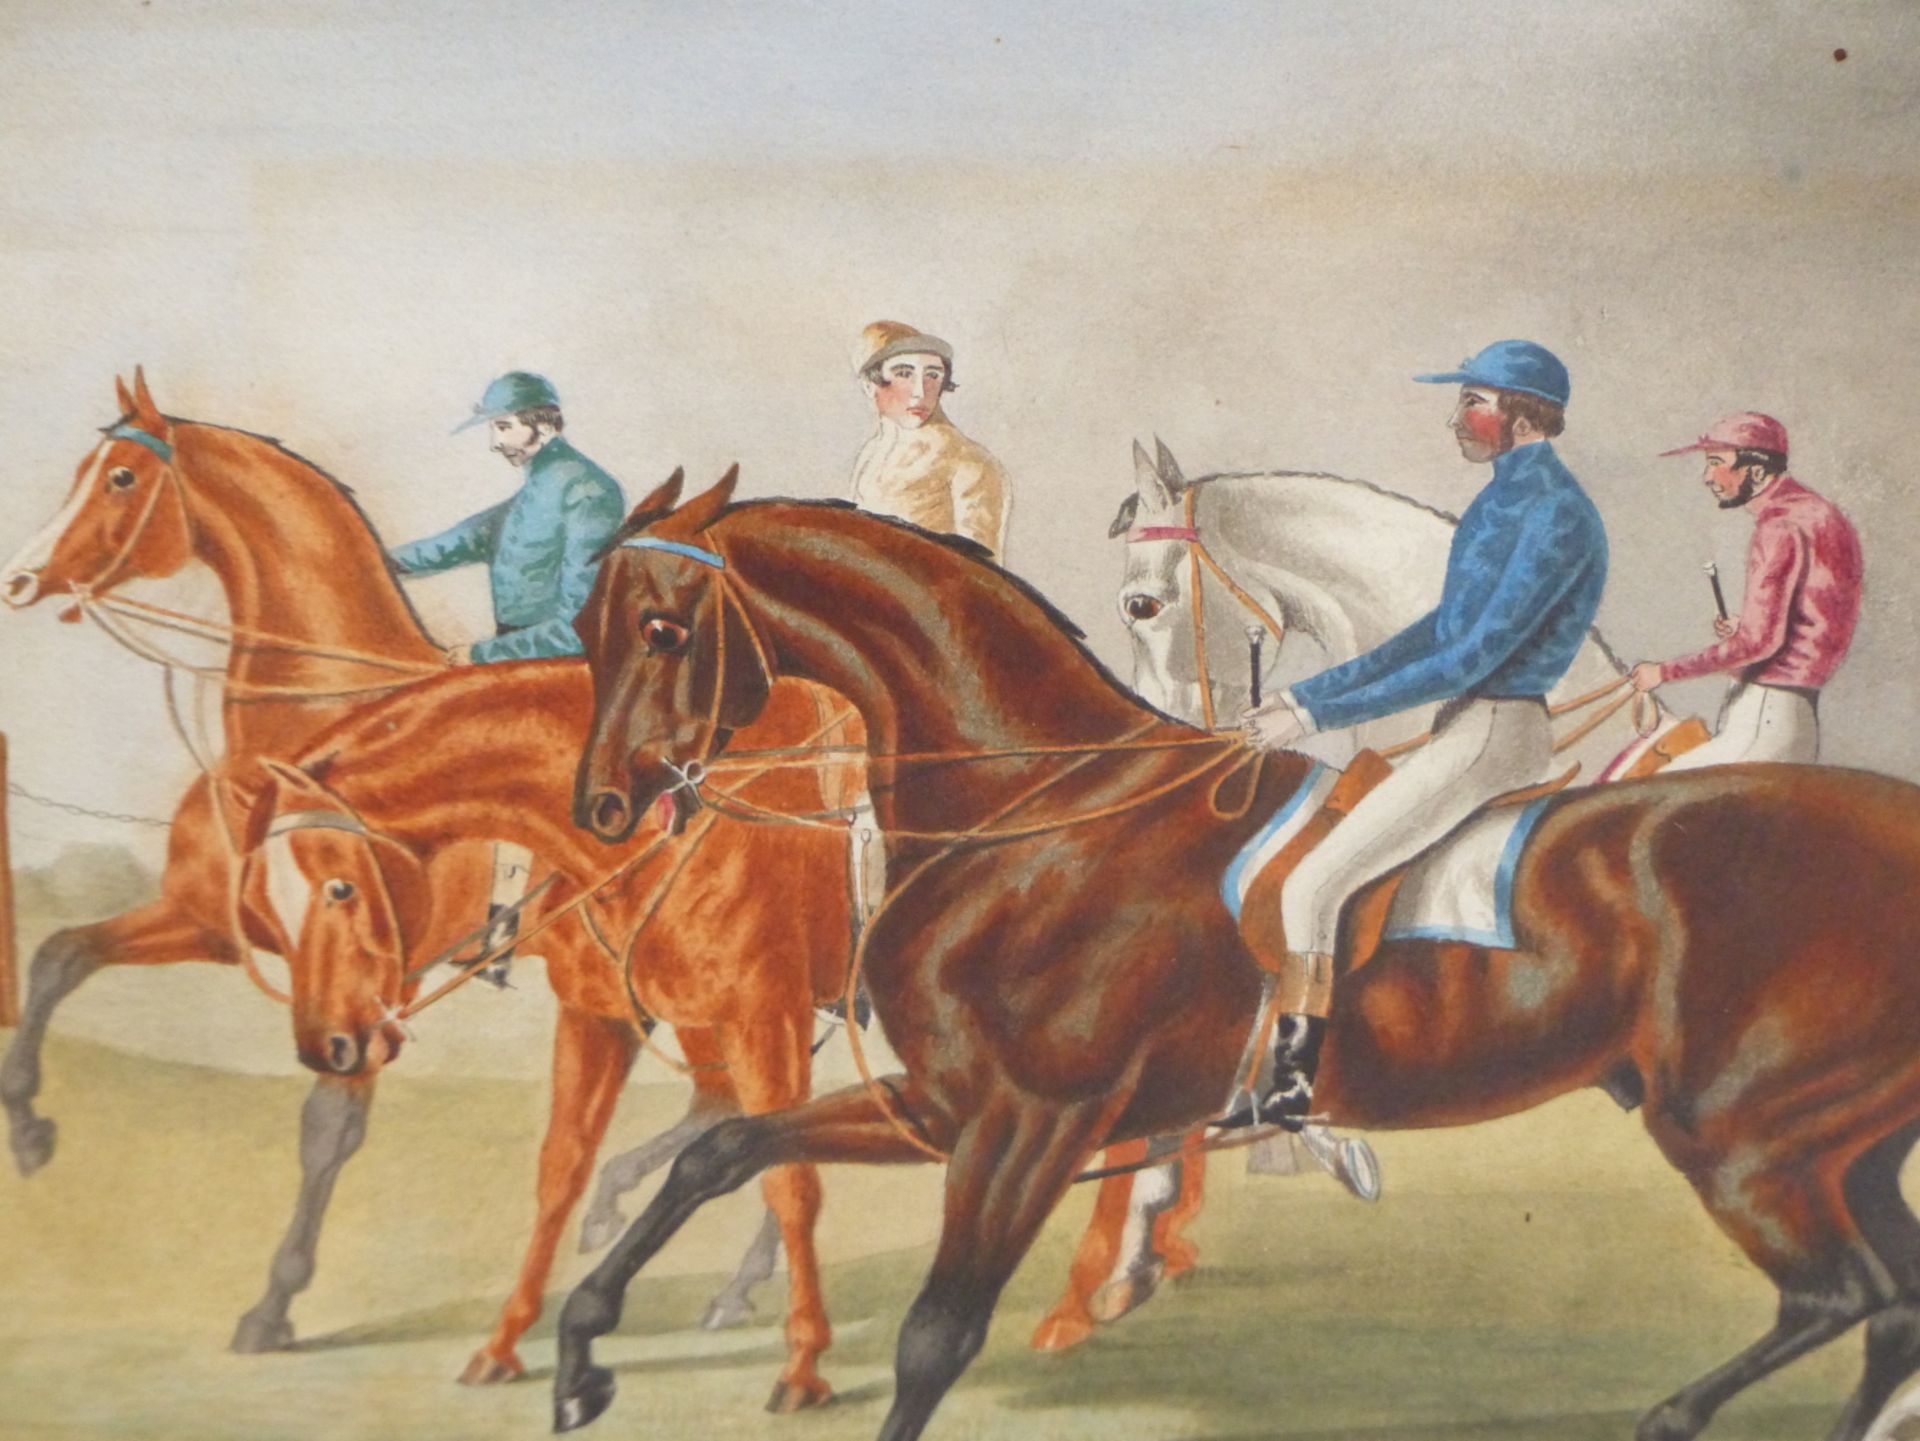 19th C. ENGLISH SCHOOL DANIEL O'ROUKE WINNING HE DERBY 1852, REPUTEDLY BY JAMES G. NOBLE, - Image 22 of 26